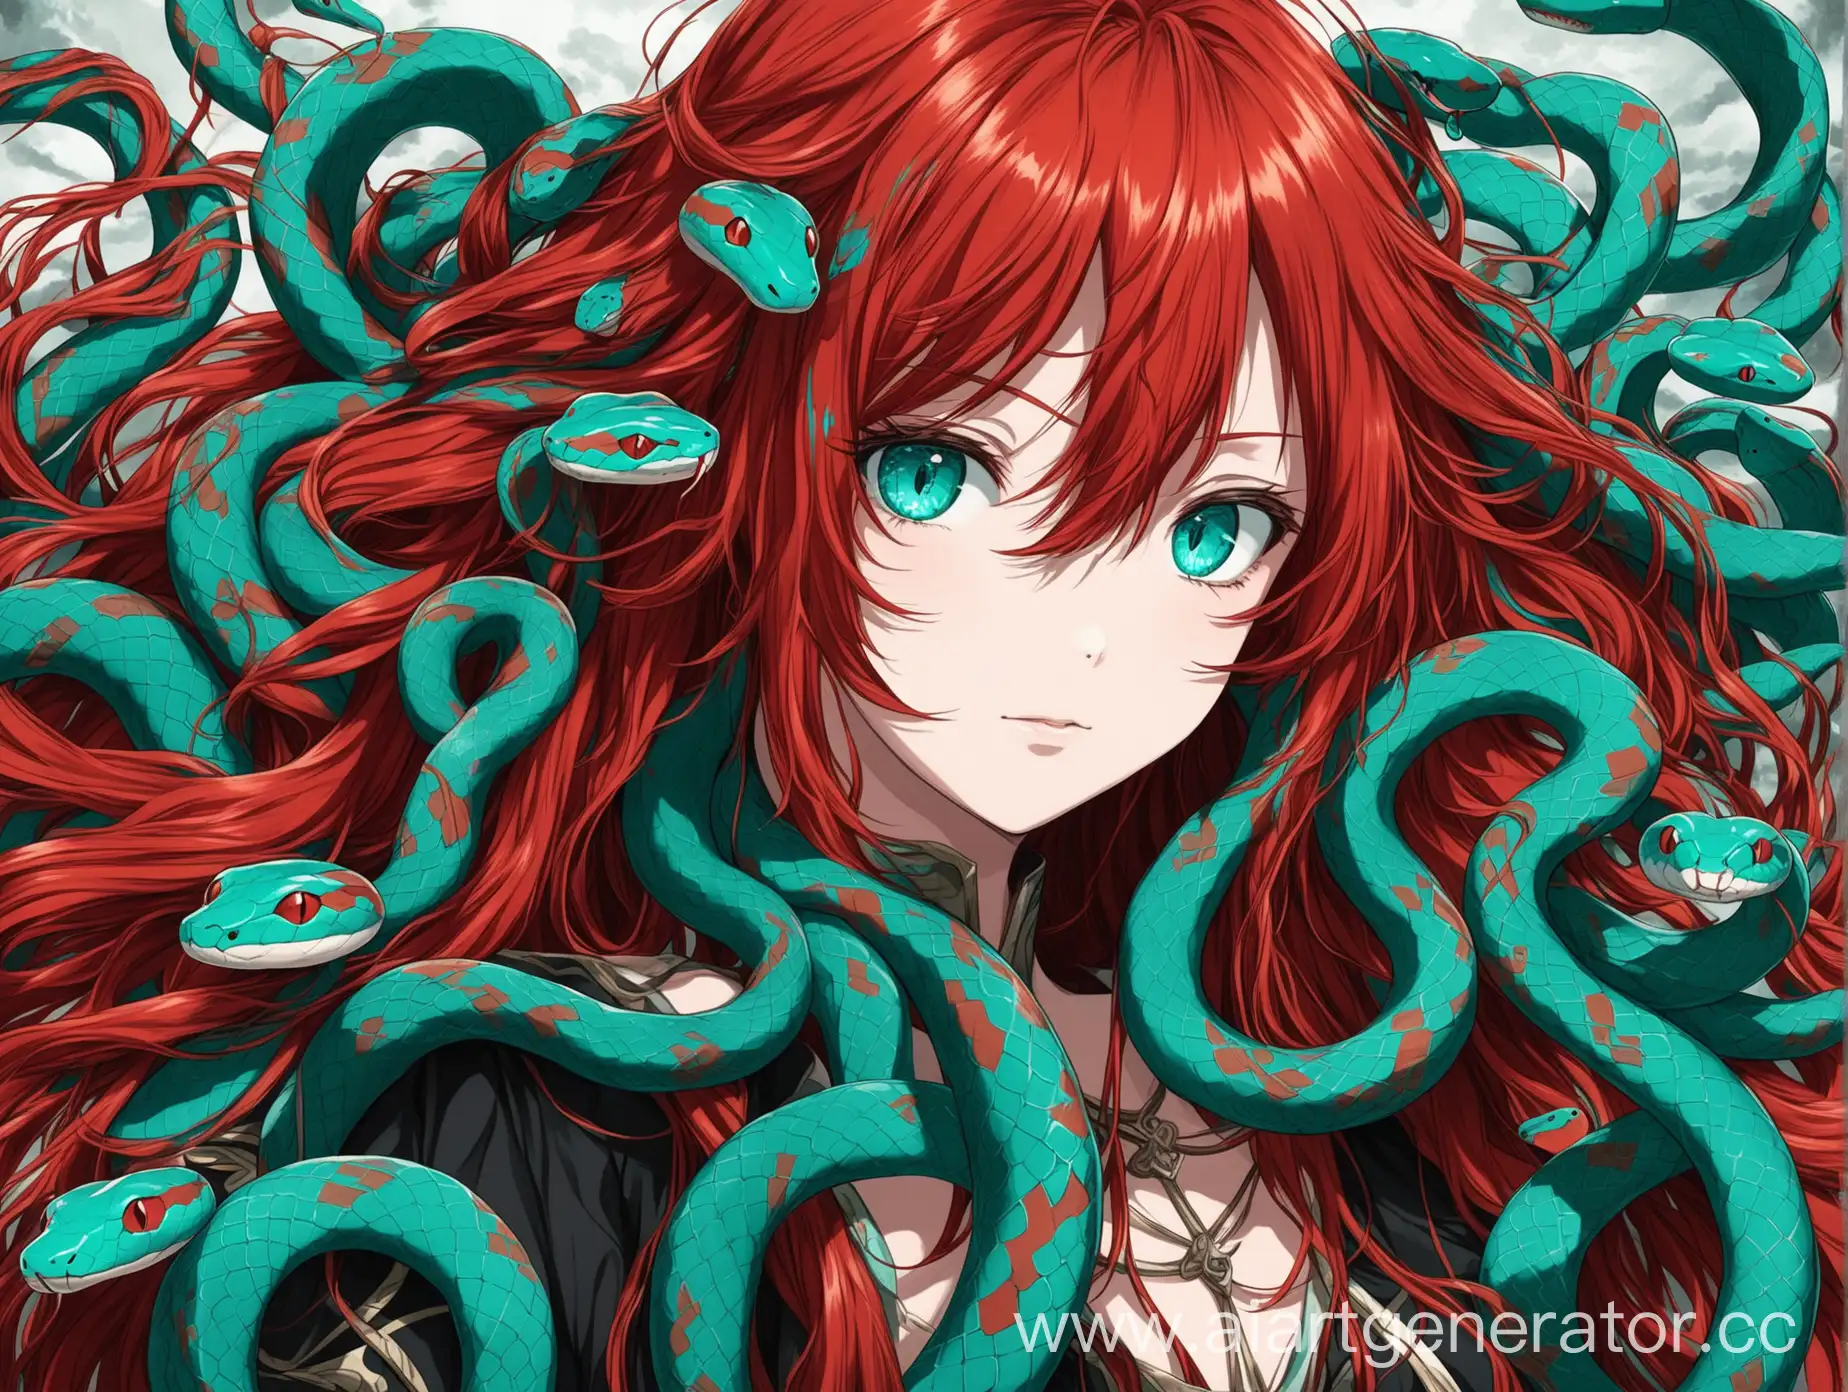 Anime-Girl-with-Red-Hair-and-Turquoise-Highlights-Surrounded-by-Serpentine-Tresses